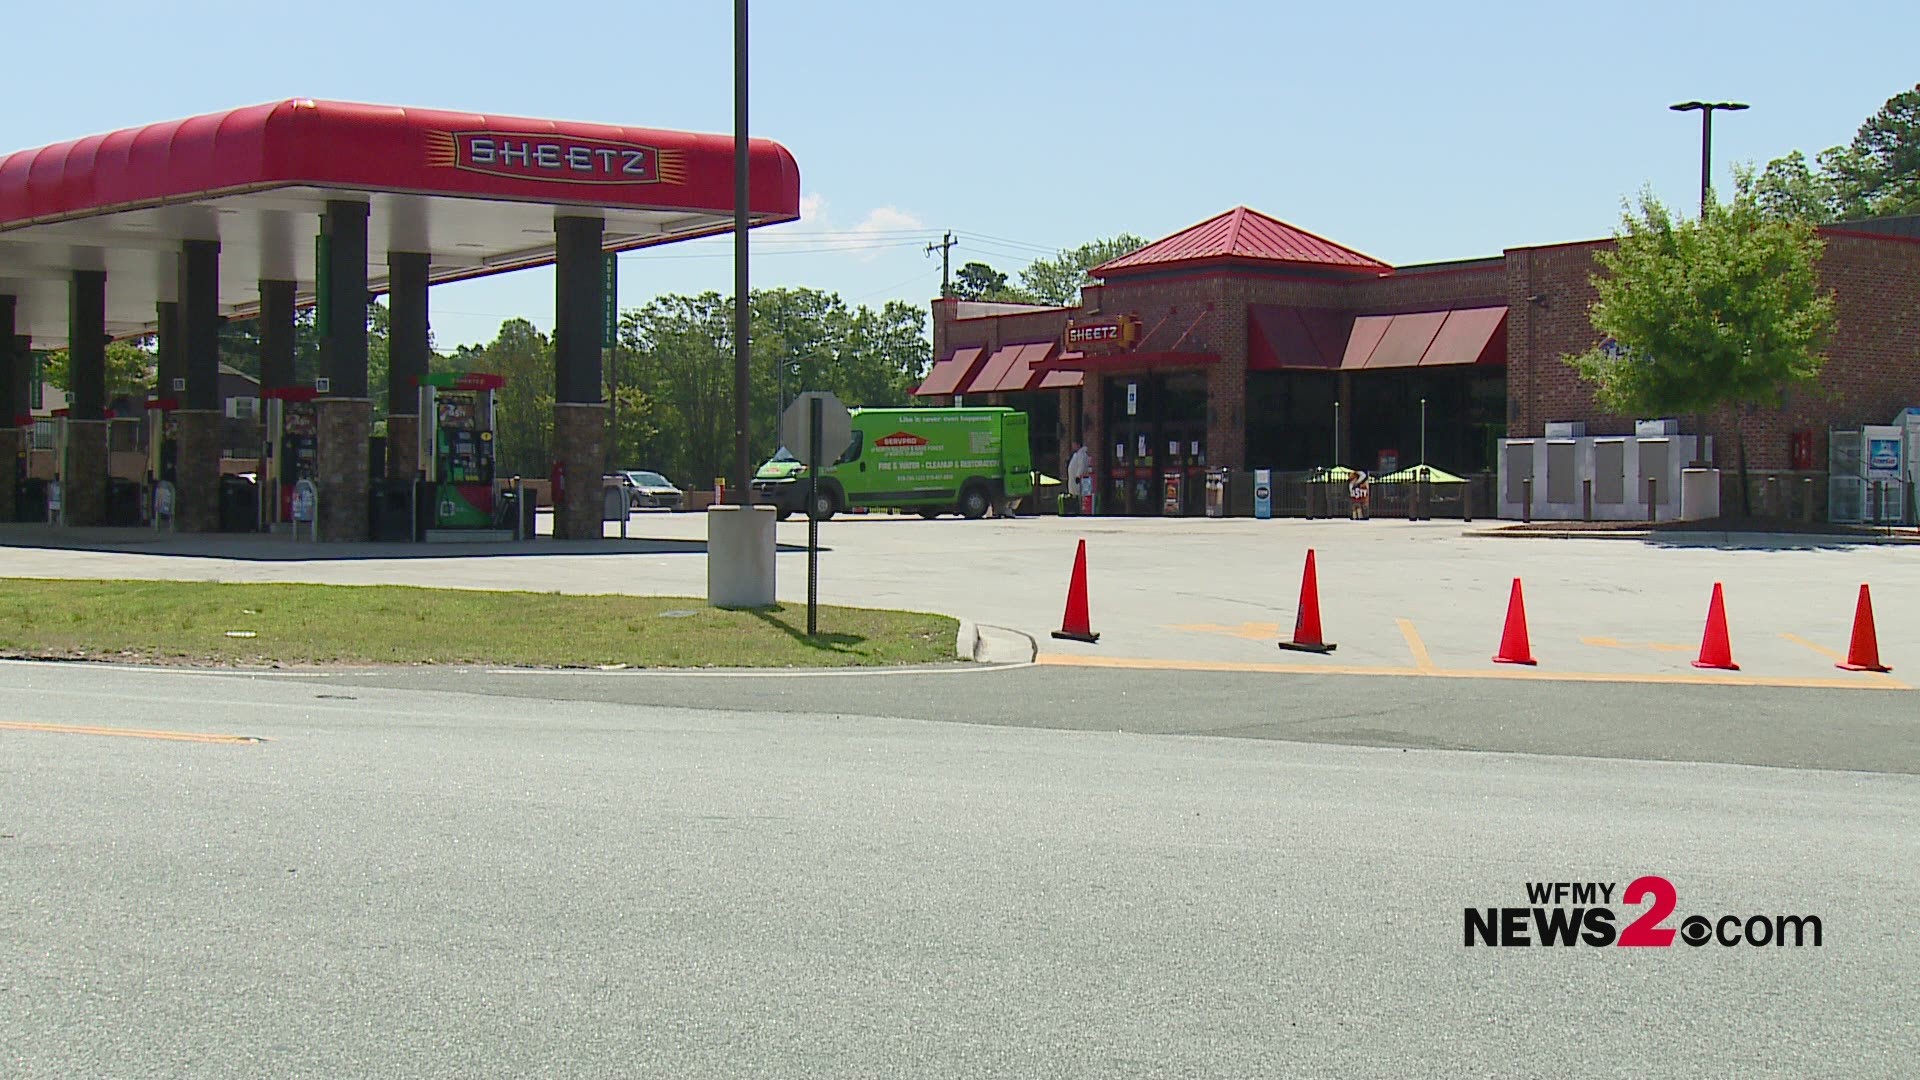 Sheetz said an employee at the Maple Avenue store tested positive for the virus and last worked on Tuesday, June 2.